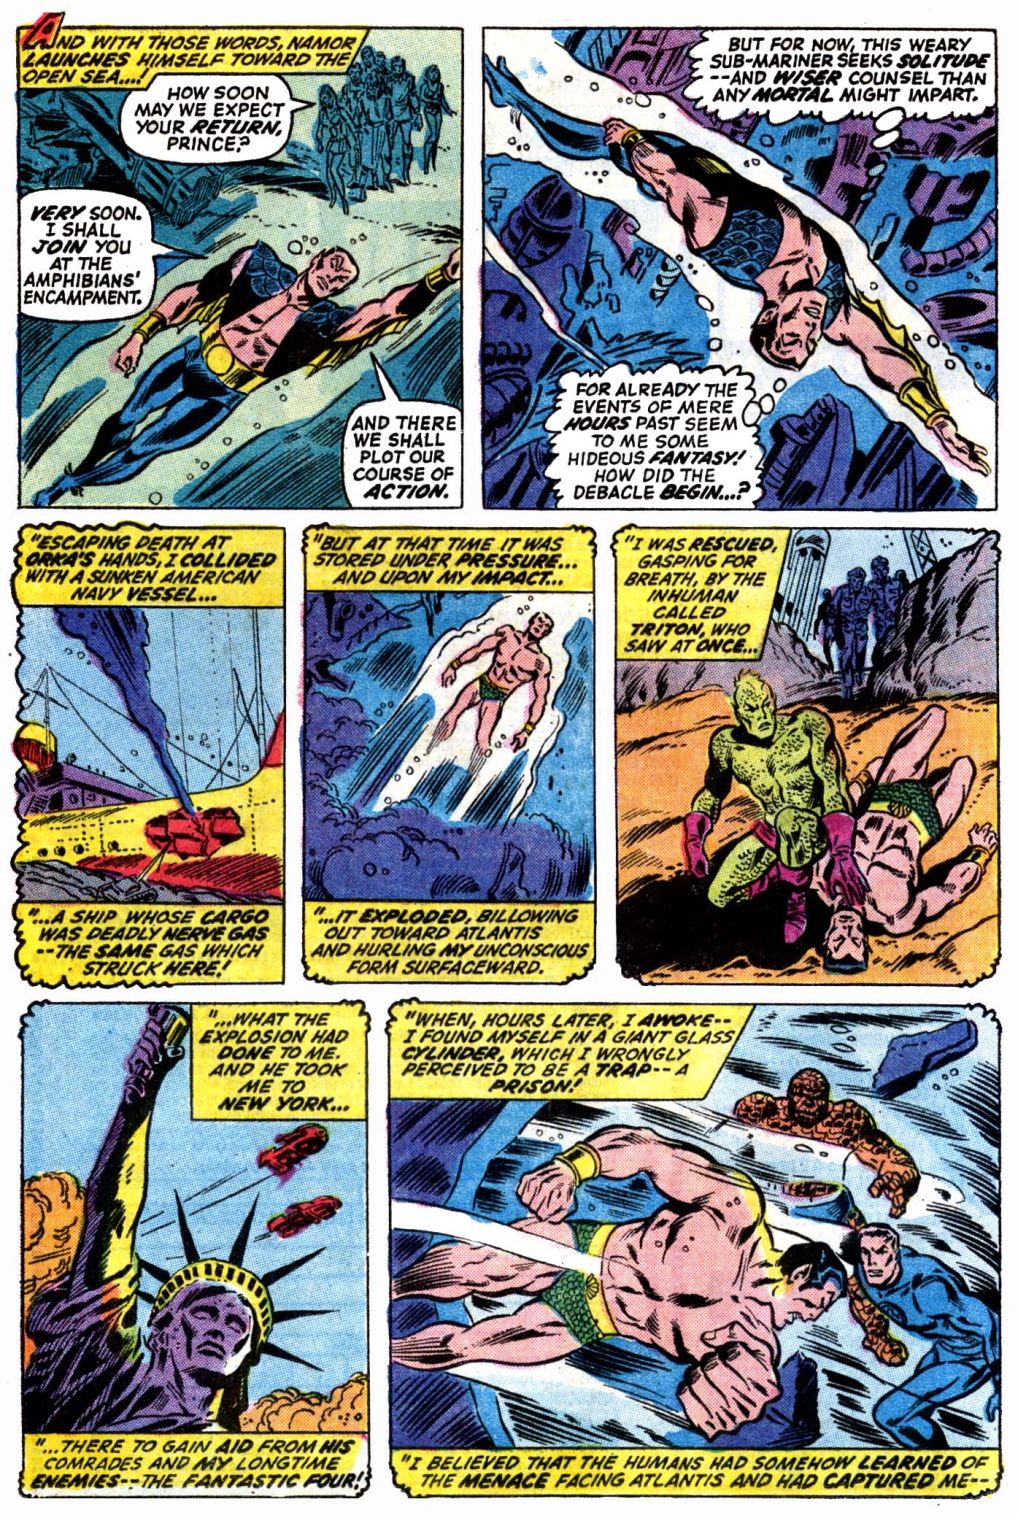 Read online The Sub-Mariner comic -  Issue #68 - 11